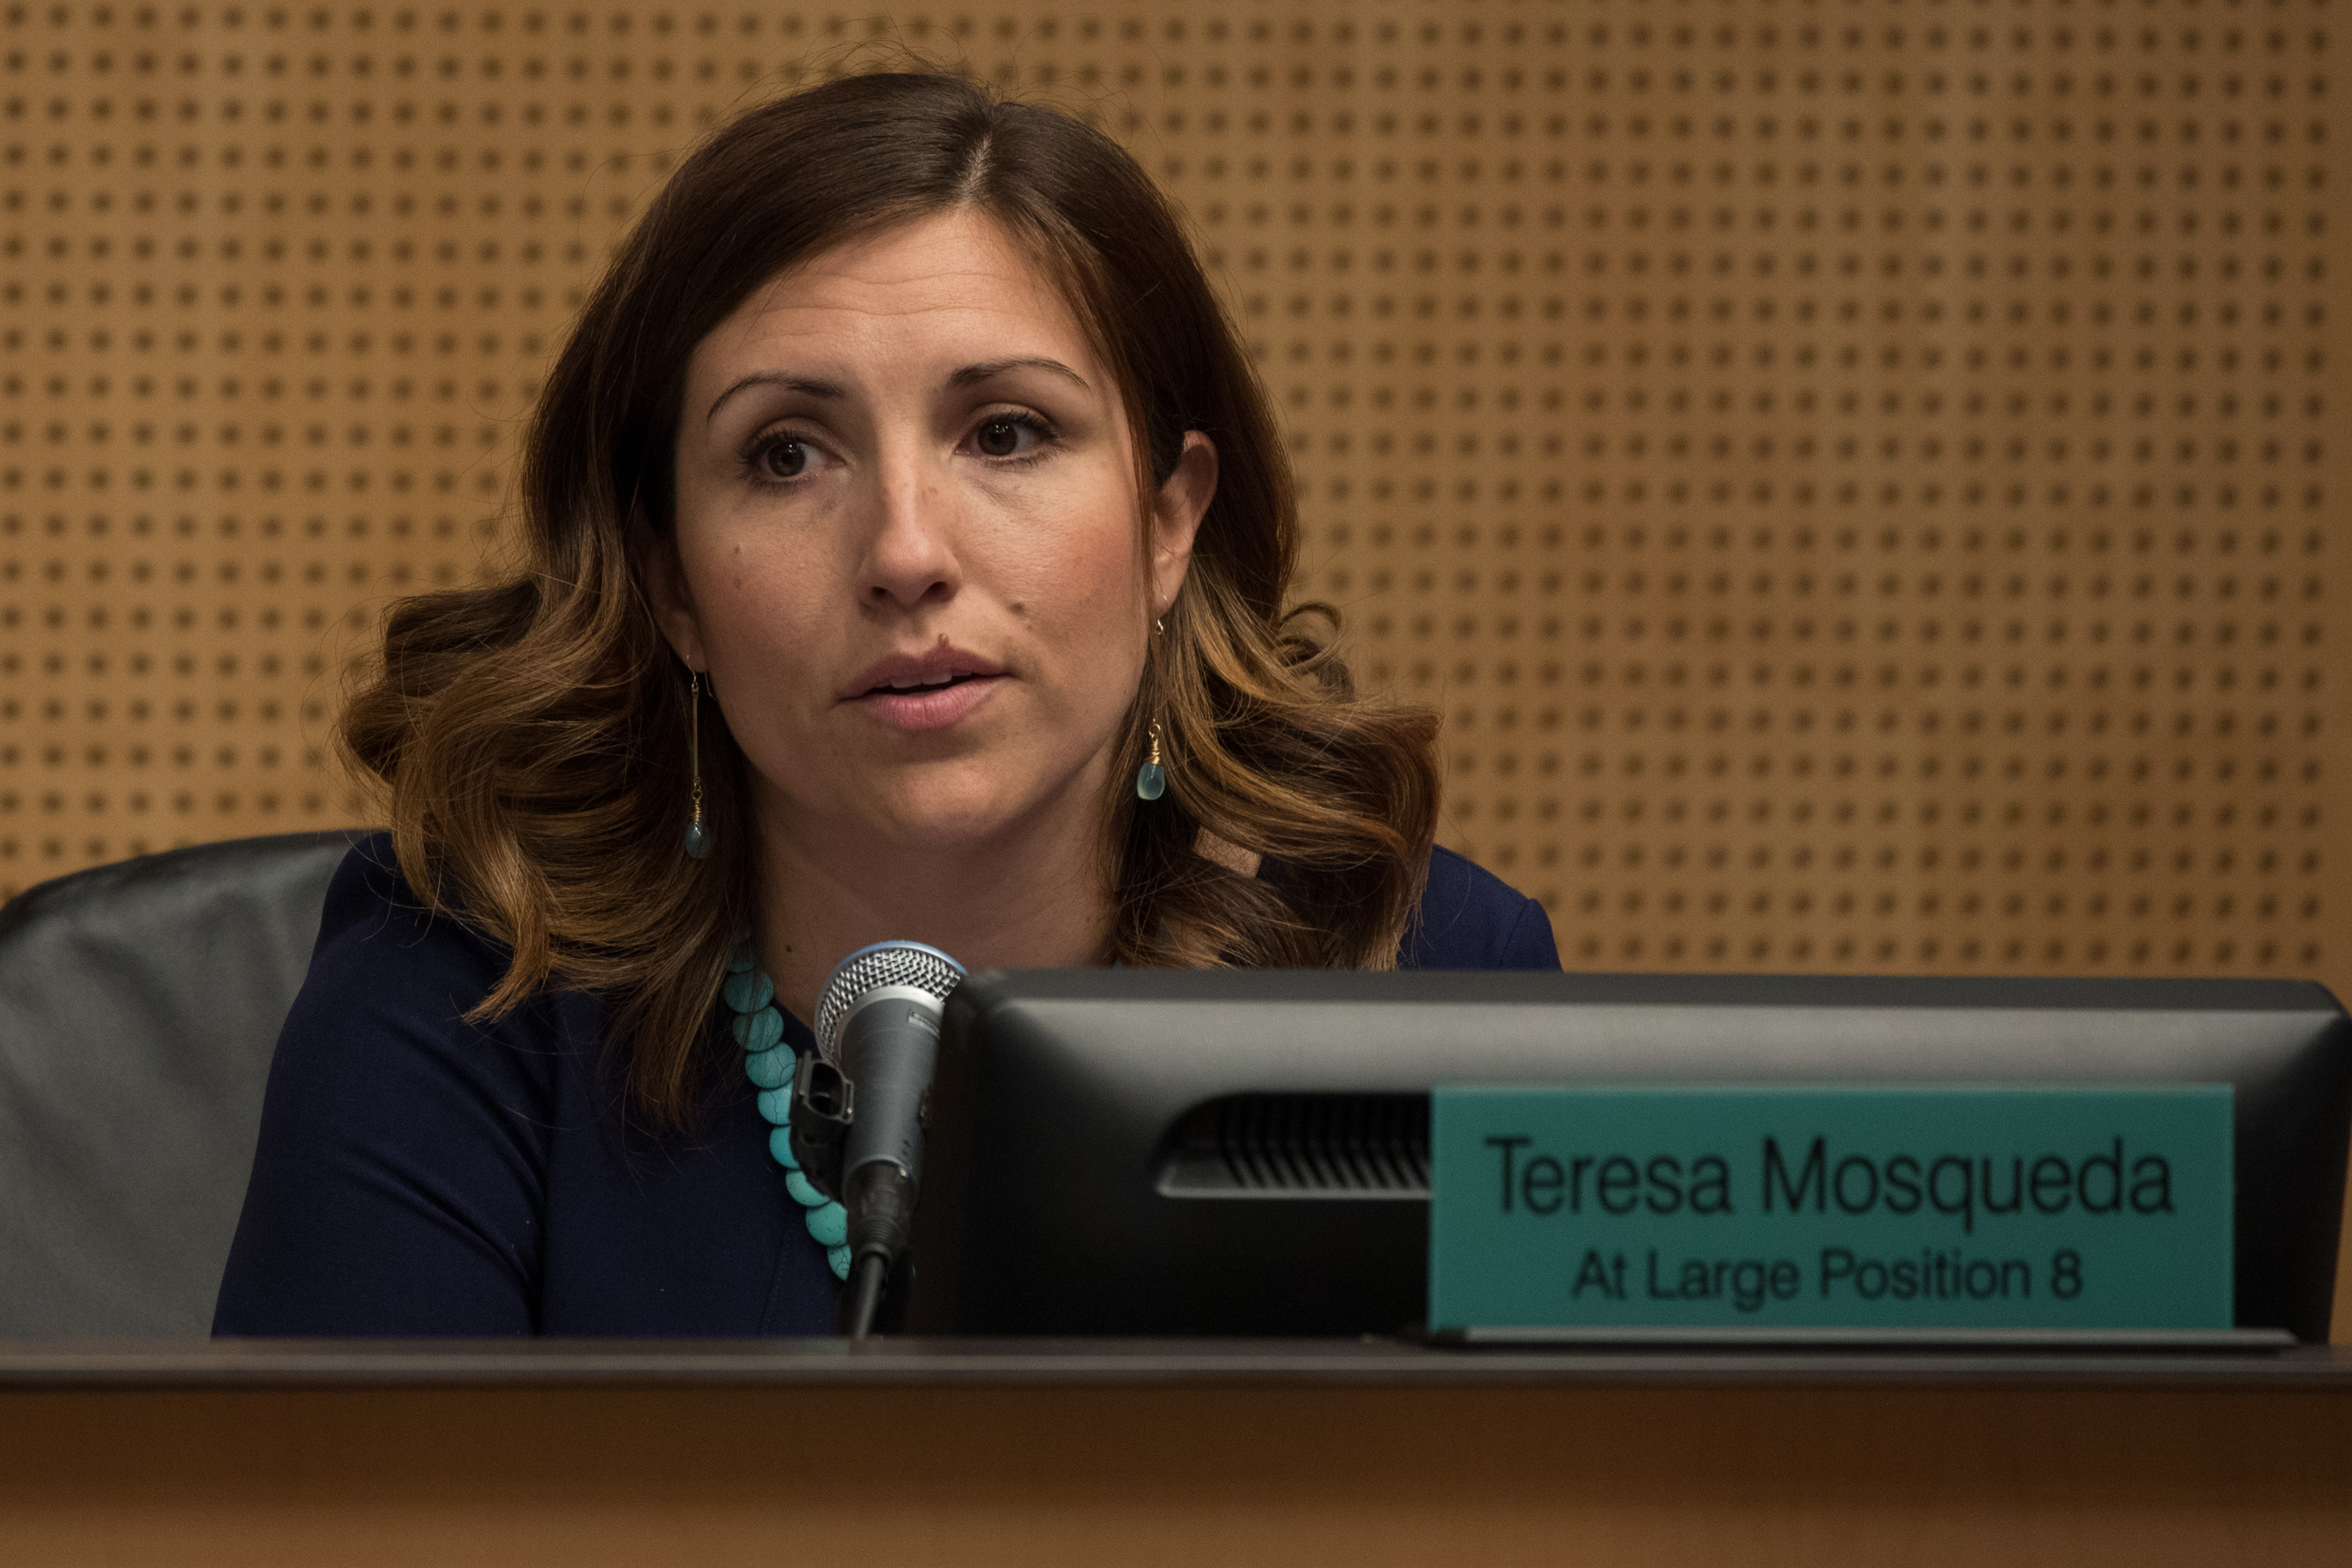 Seattle City Councilmember Teresa Mosqueda during a vote to repeal the head tax at City Hall in Seattle, June 12, 2018. (Photo by Matt M. McKnight)